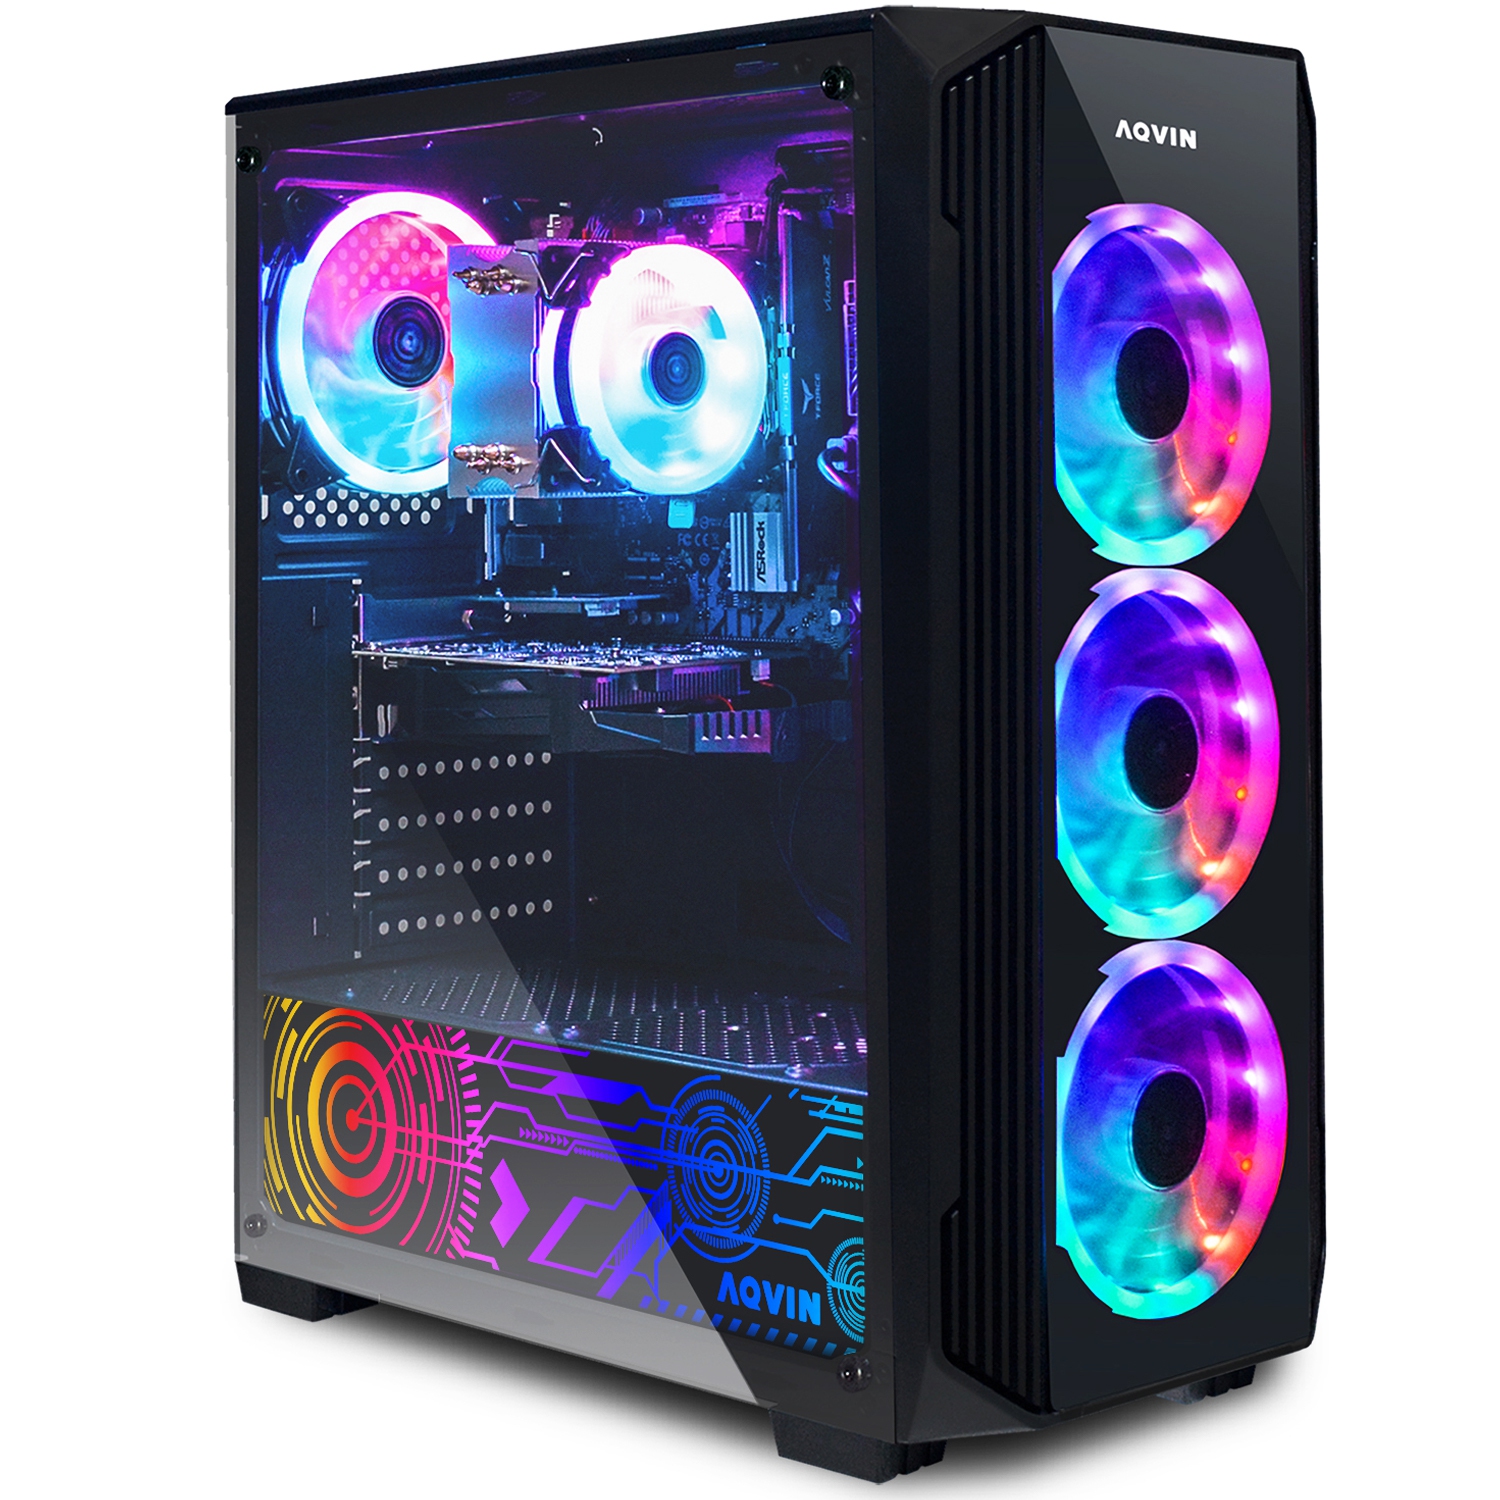 AQVIN ZForce Tower Gaming PC - RGB (Intel Core i7 9th GEN/ 32GB RAM/ 1TB SSD/ RTX 3060 12GB/ Windows 11 Pro) Gaming Desktop Computer - Only at Best Buy